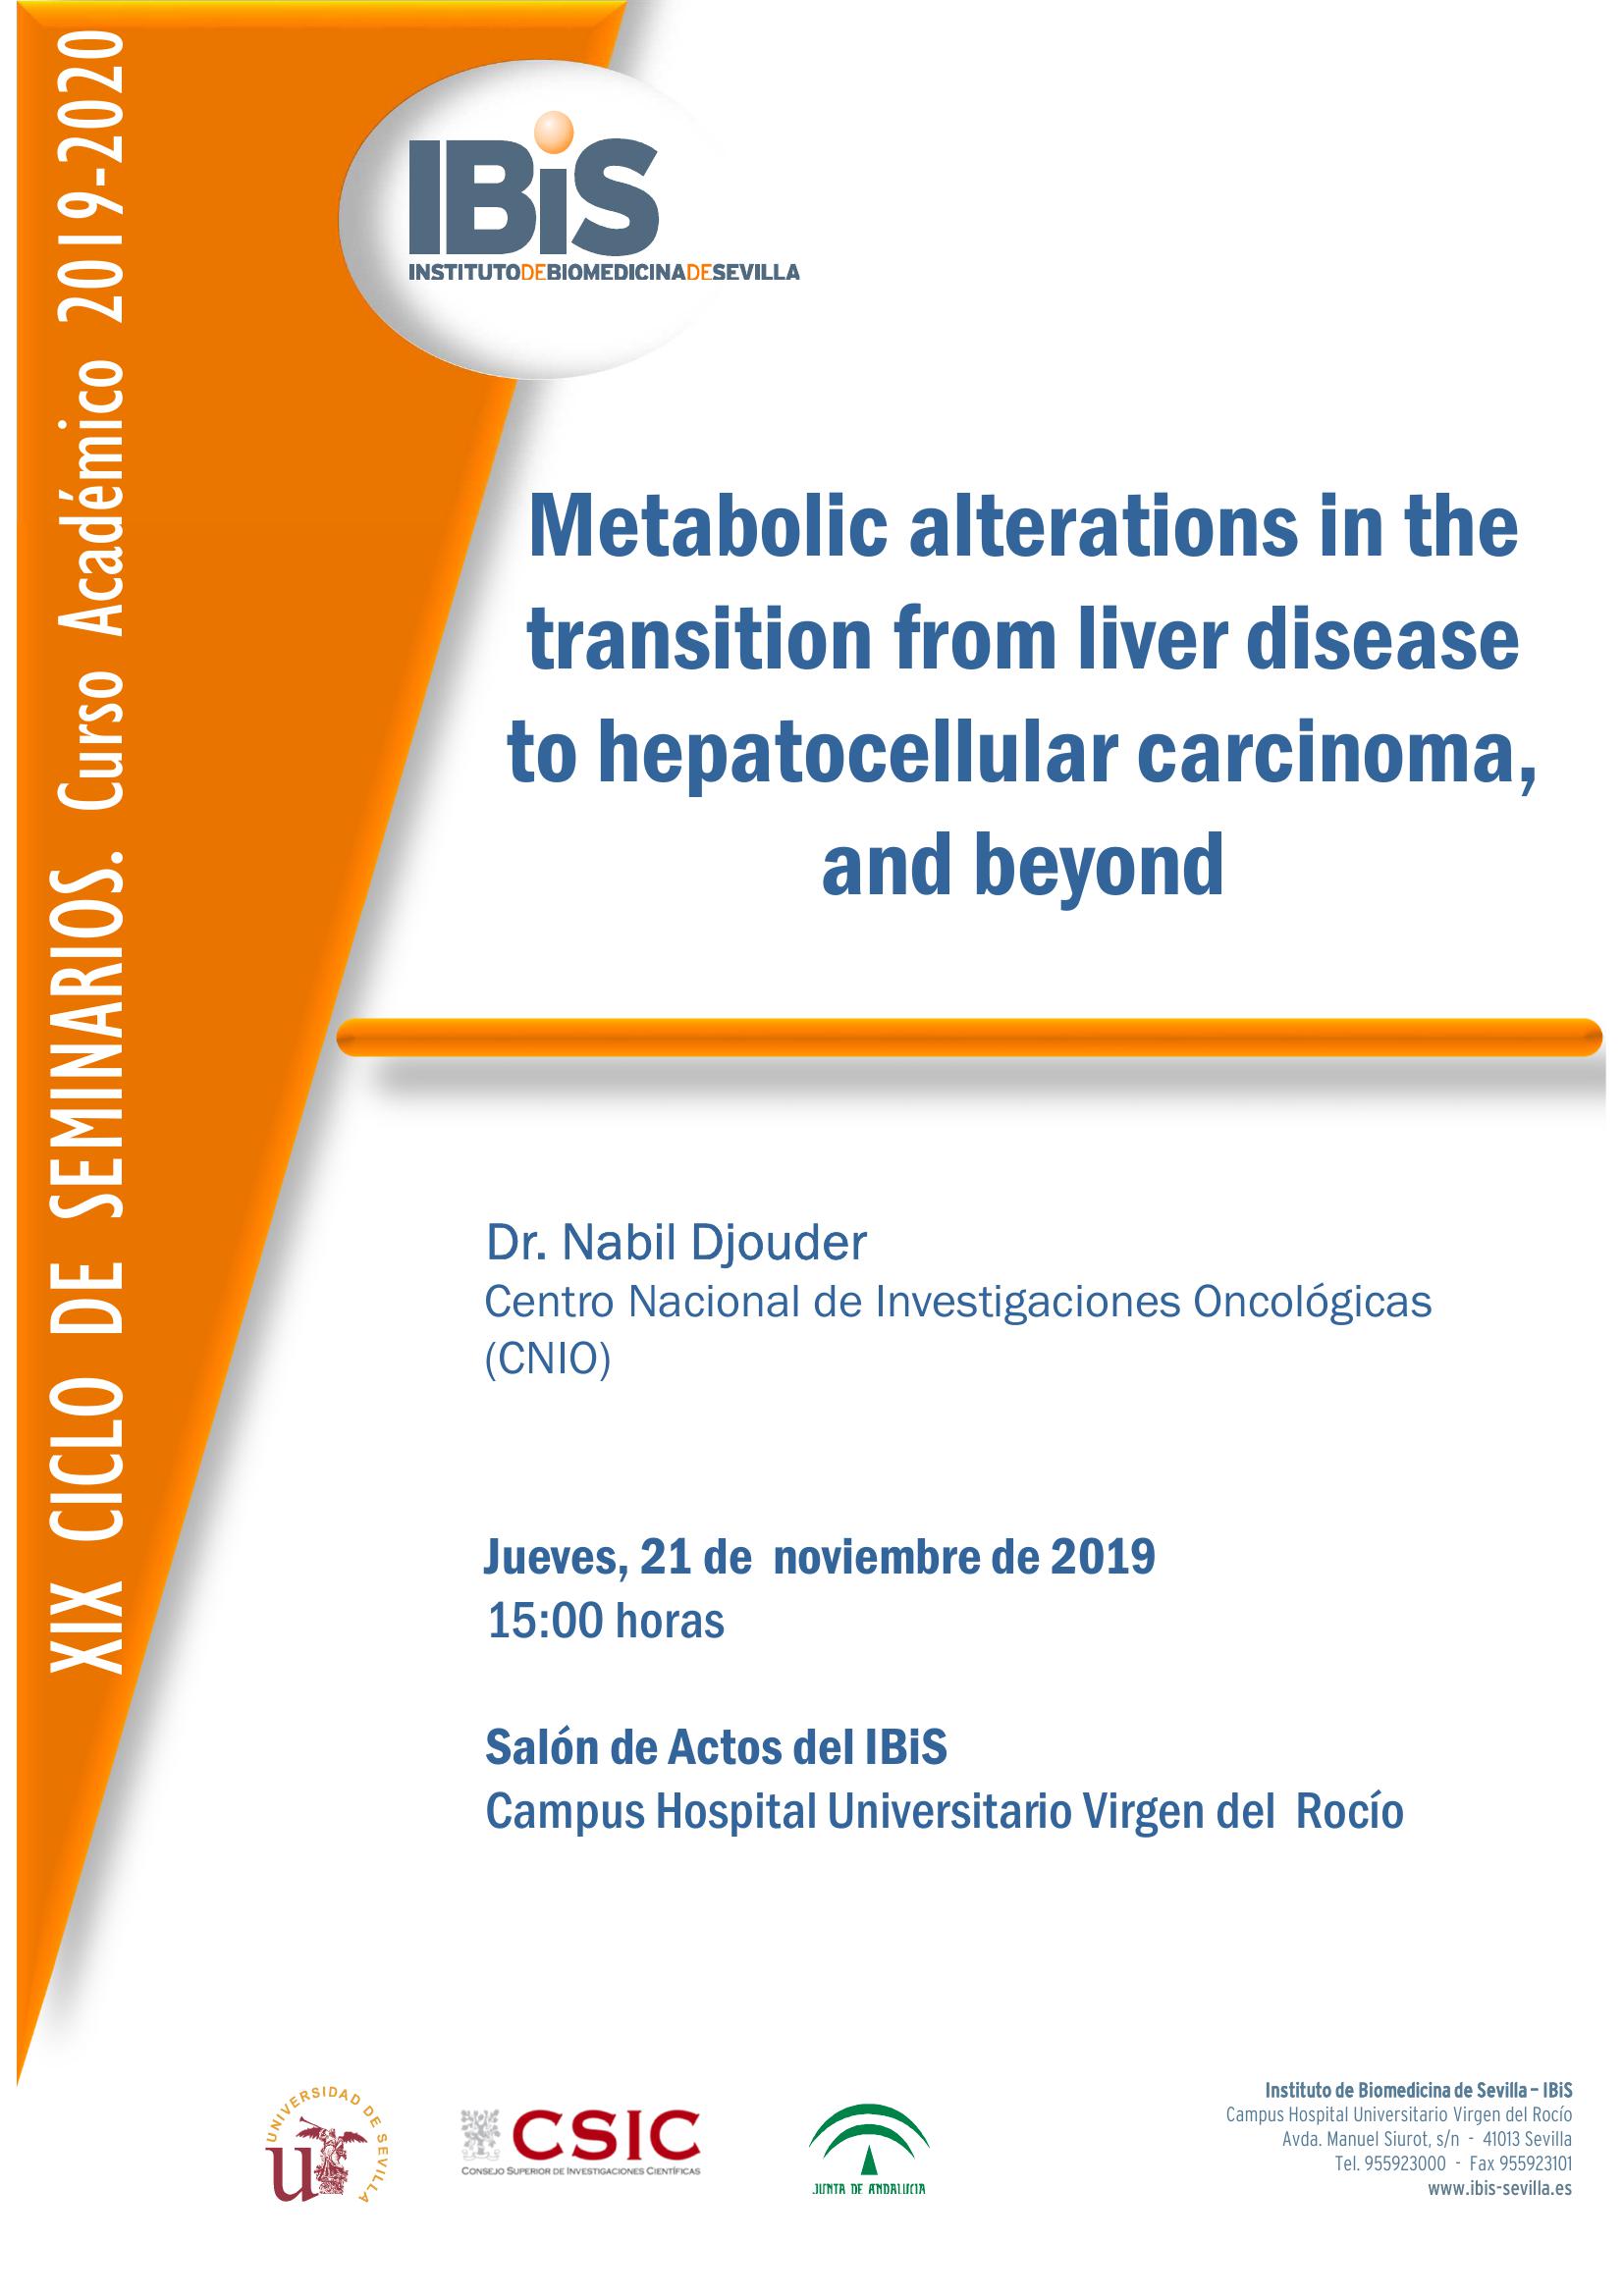 Poster: Metabolic alterations in the transition from liver disease to hepatocellular carcinoma, and beyond